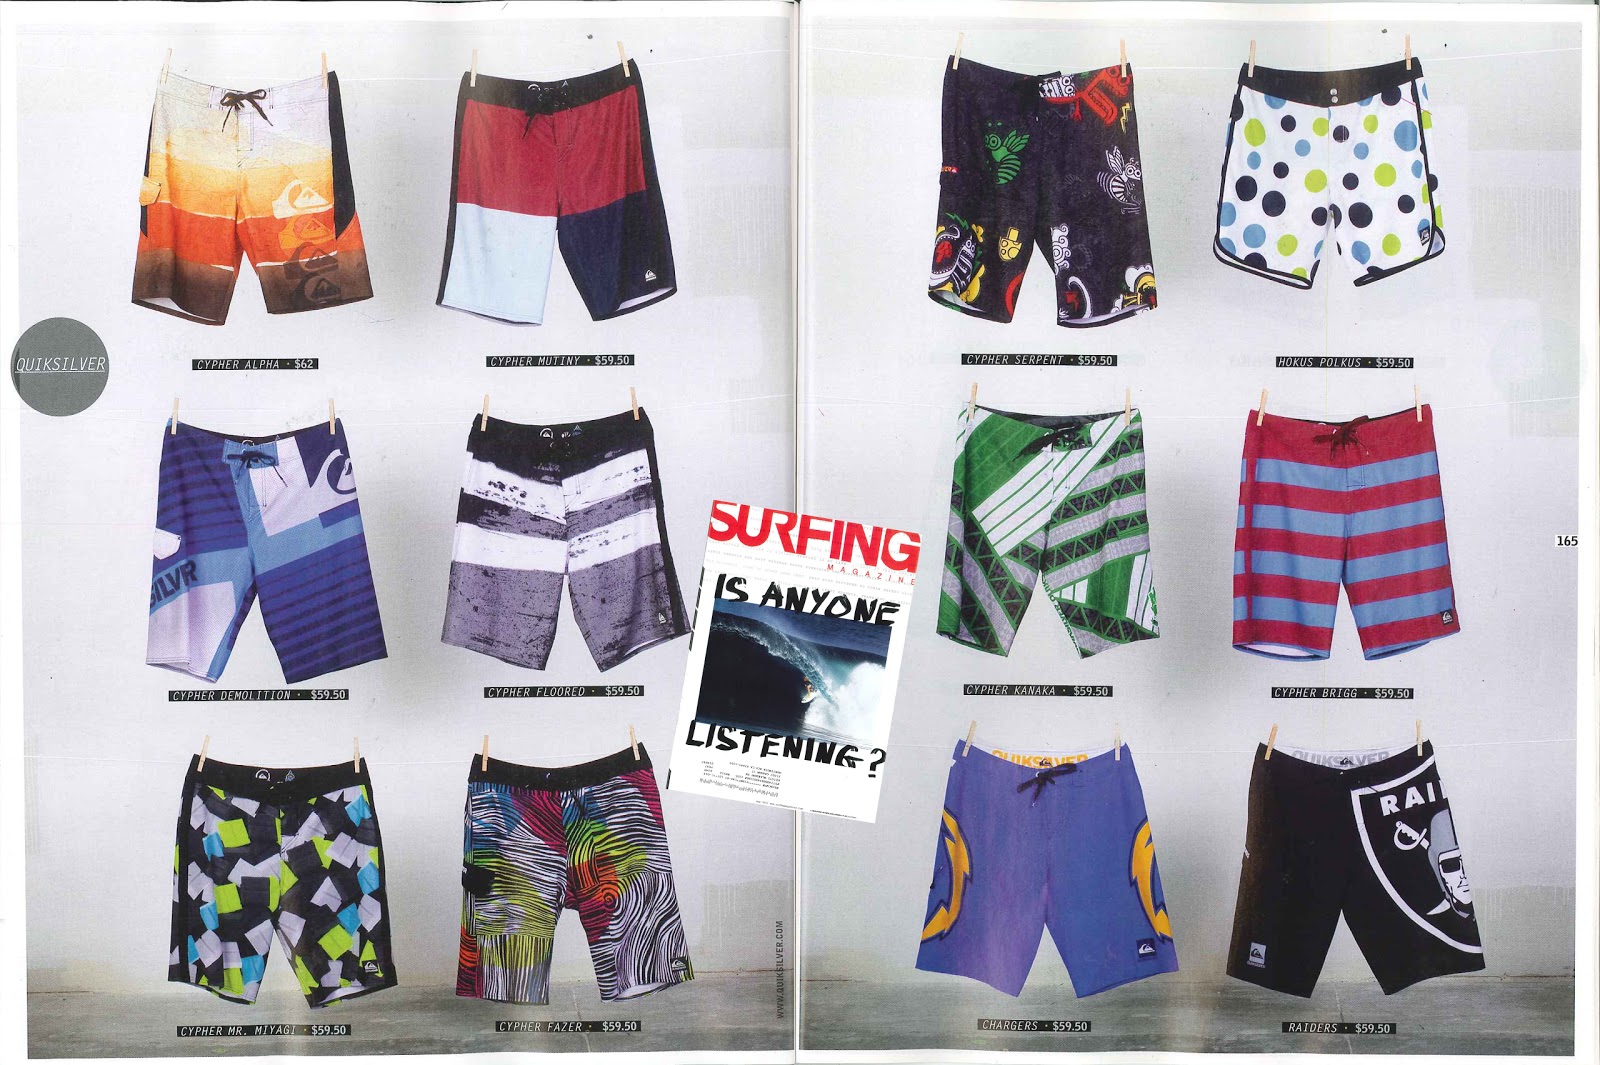 Quiksilver PR: Clay Marzo and Quik Boardies in Surfing Magazine